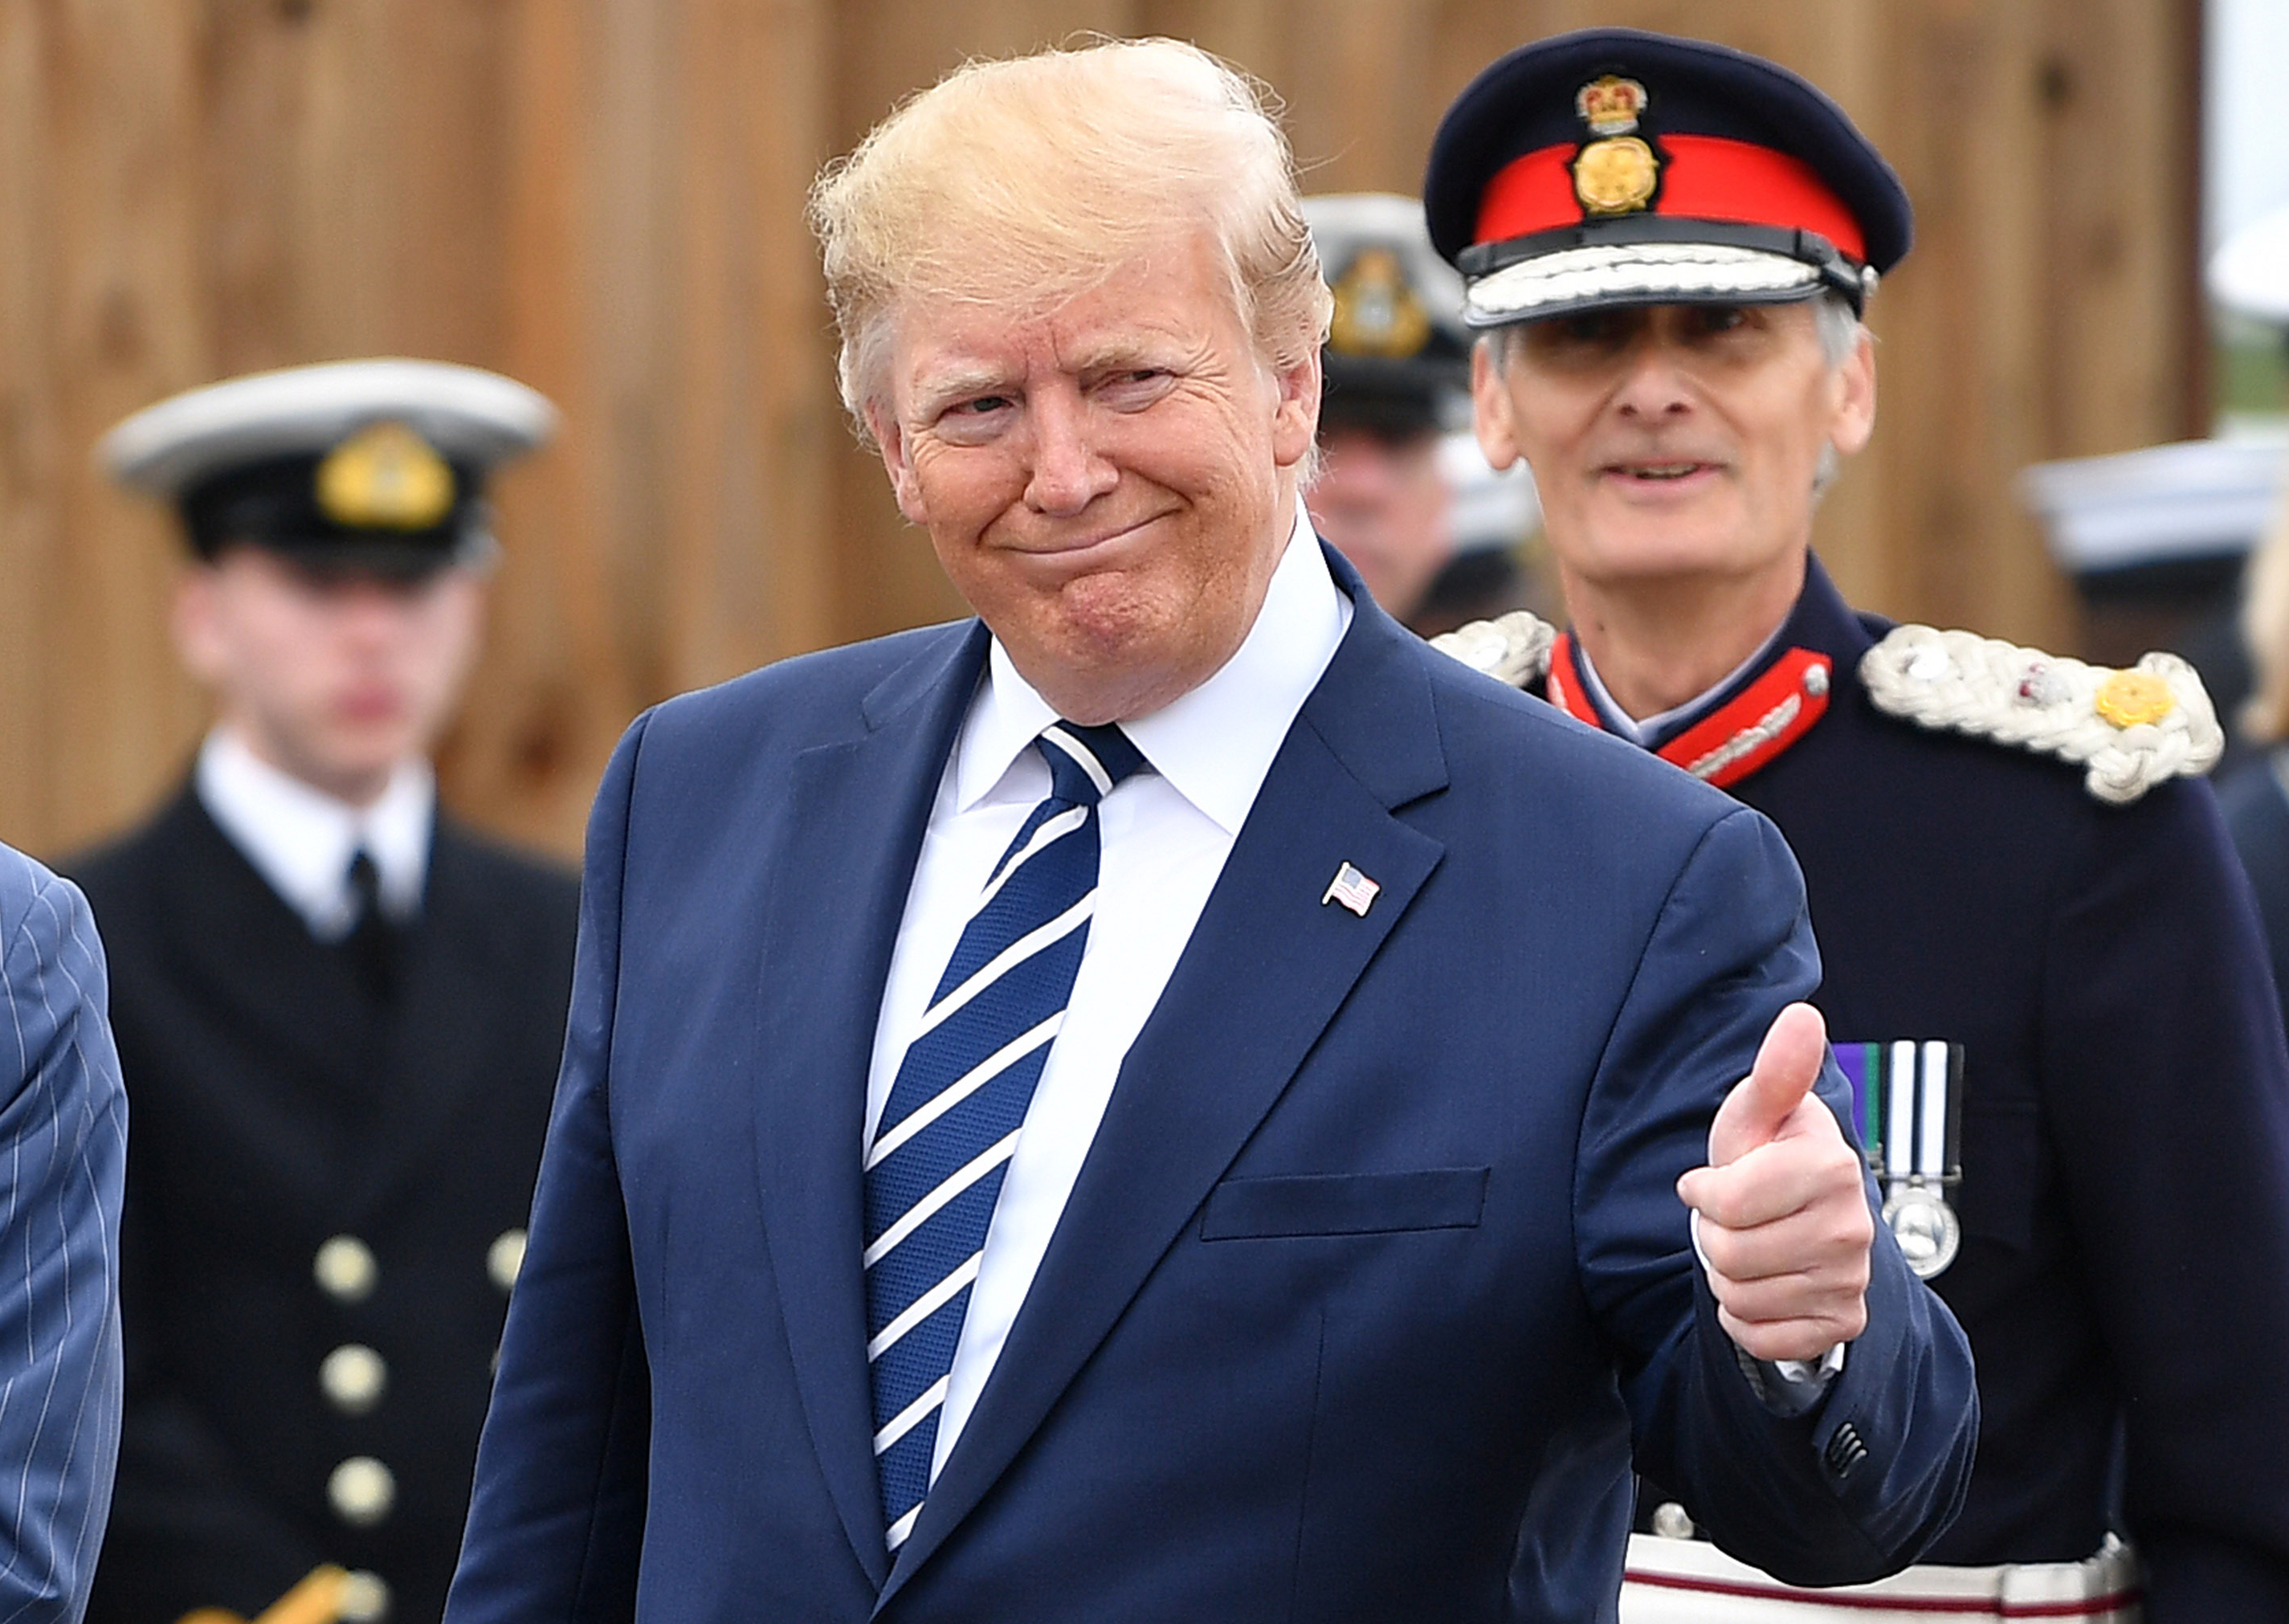 President Trump attends an event to commemorate the 75th anniversary of the D-Day landings in Portsmouth, southern England, on June 5, 2019. 